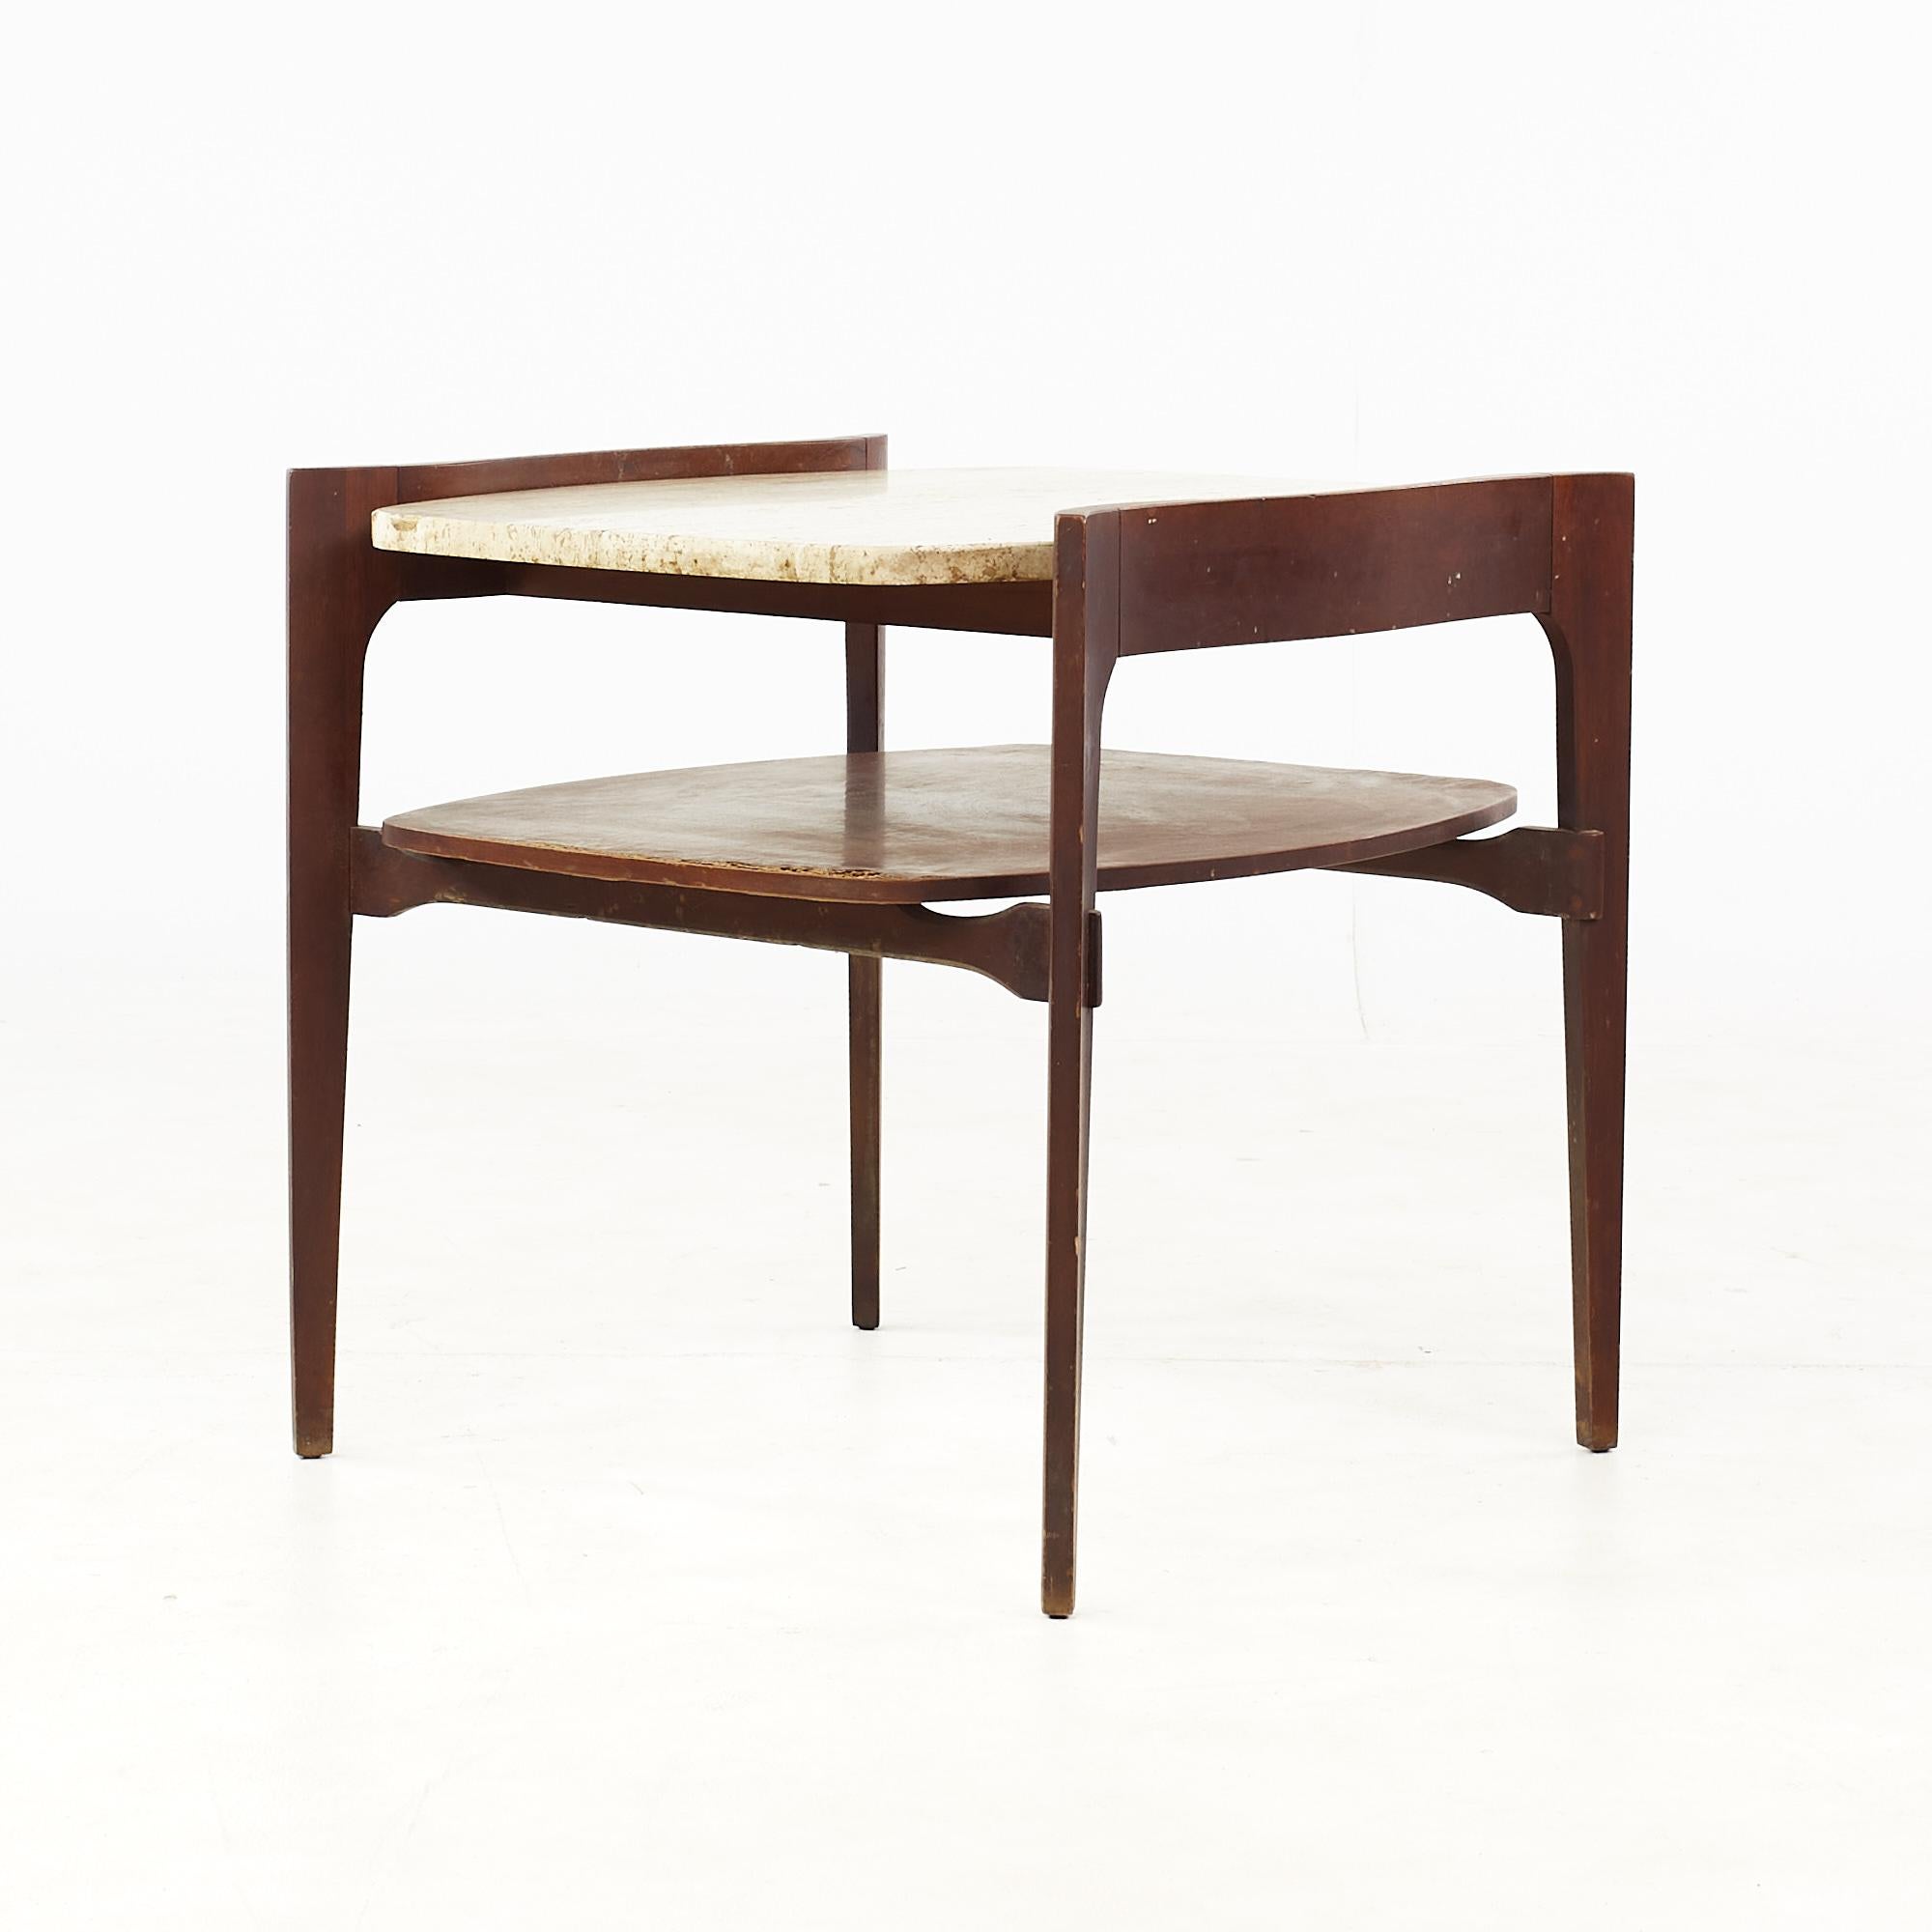 Late 20th Century Bertha Schaefer MCM Sculpted Walnut and Italian Travertine Side Tables, Pair